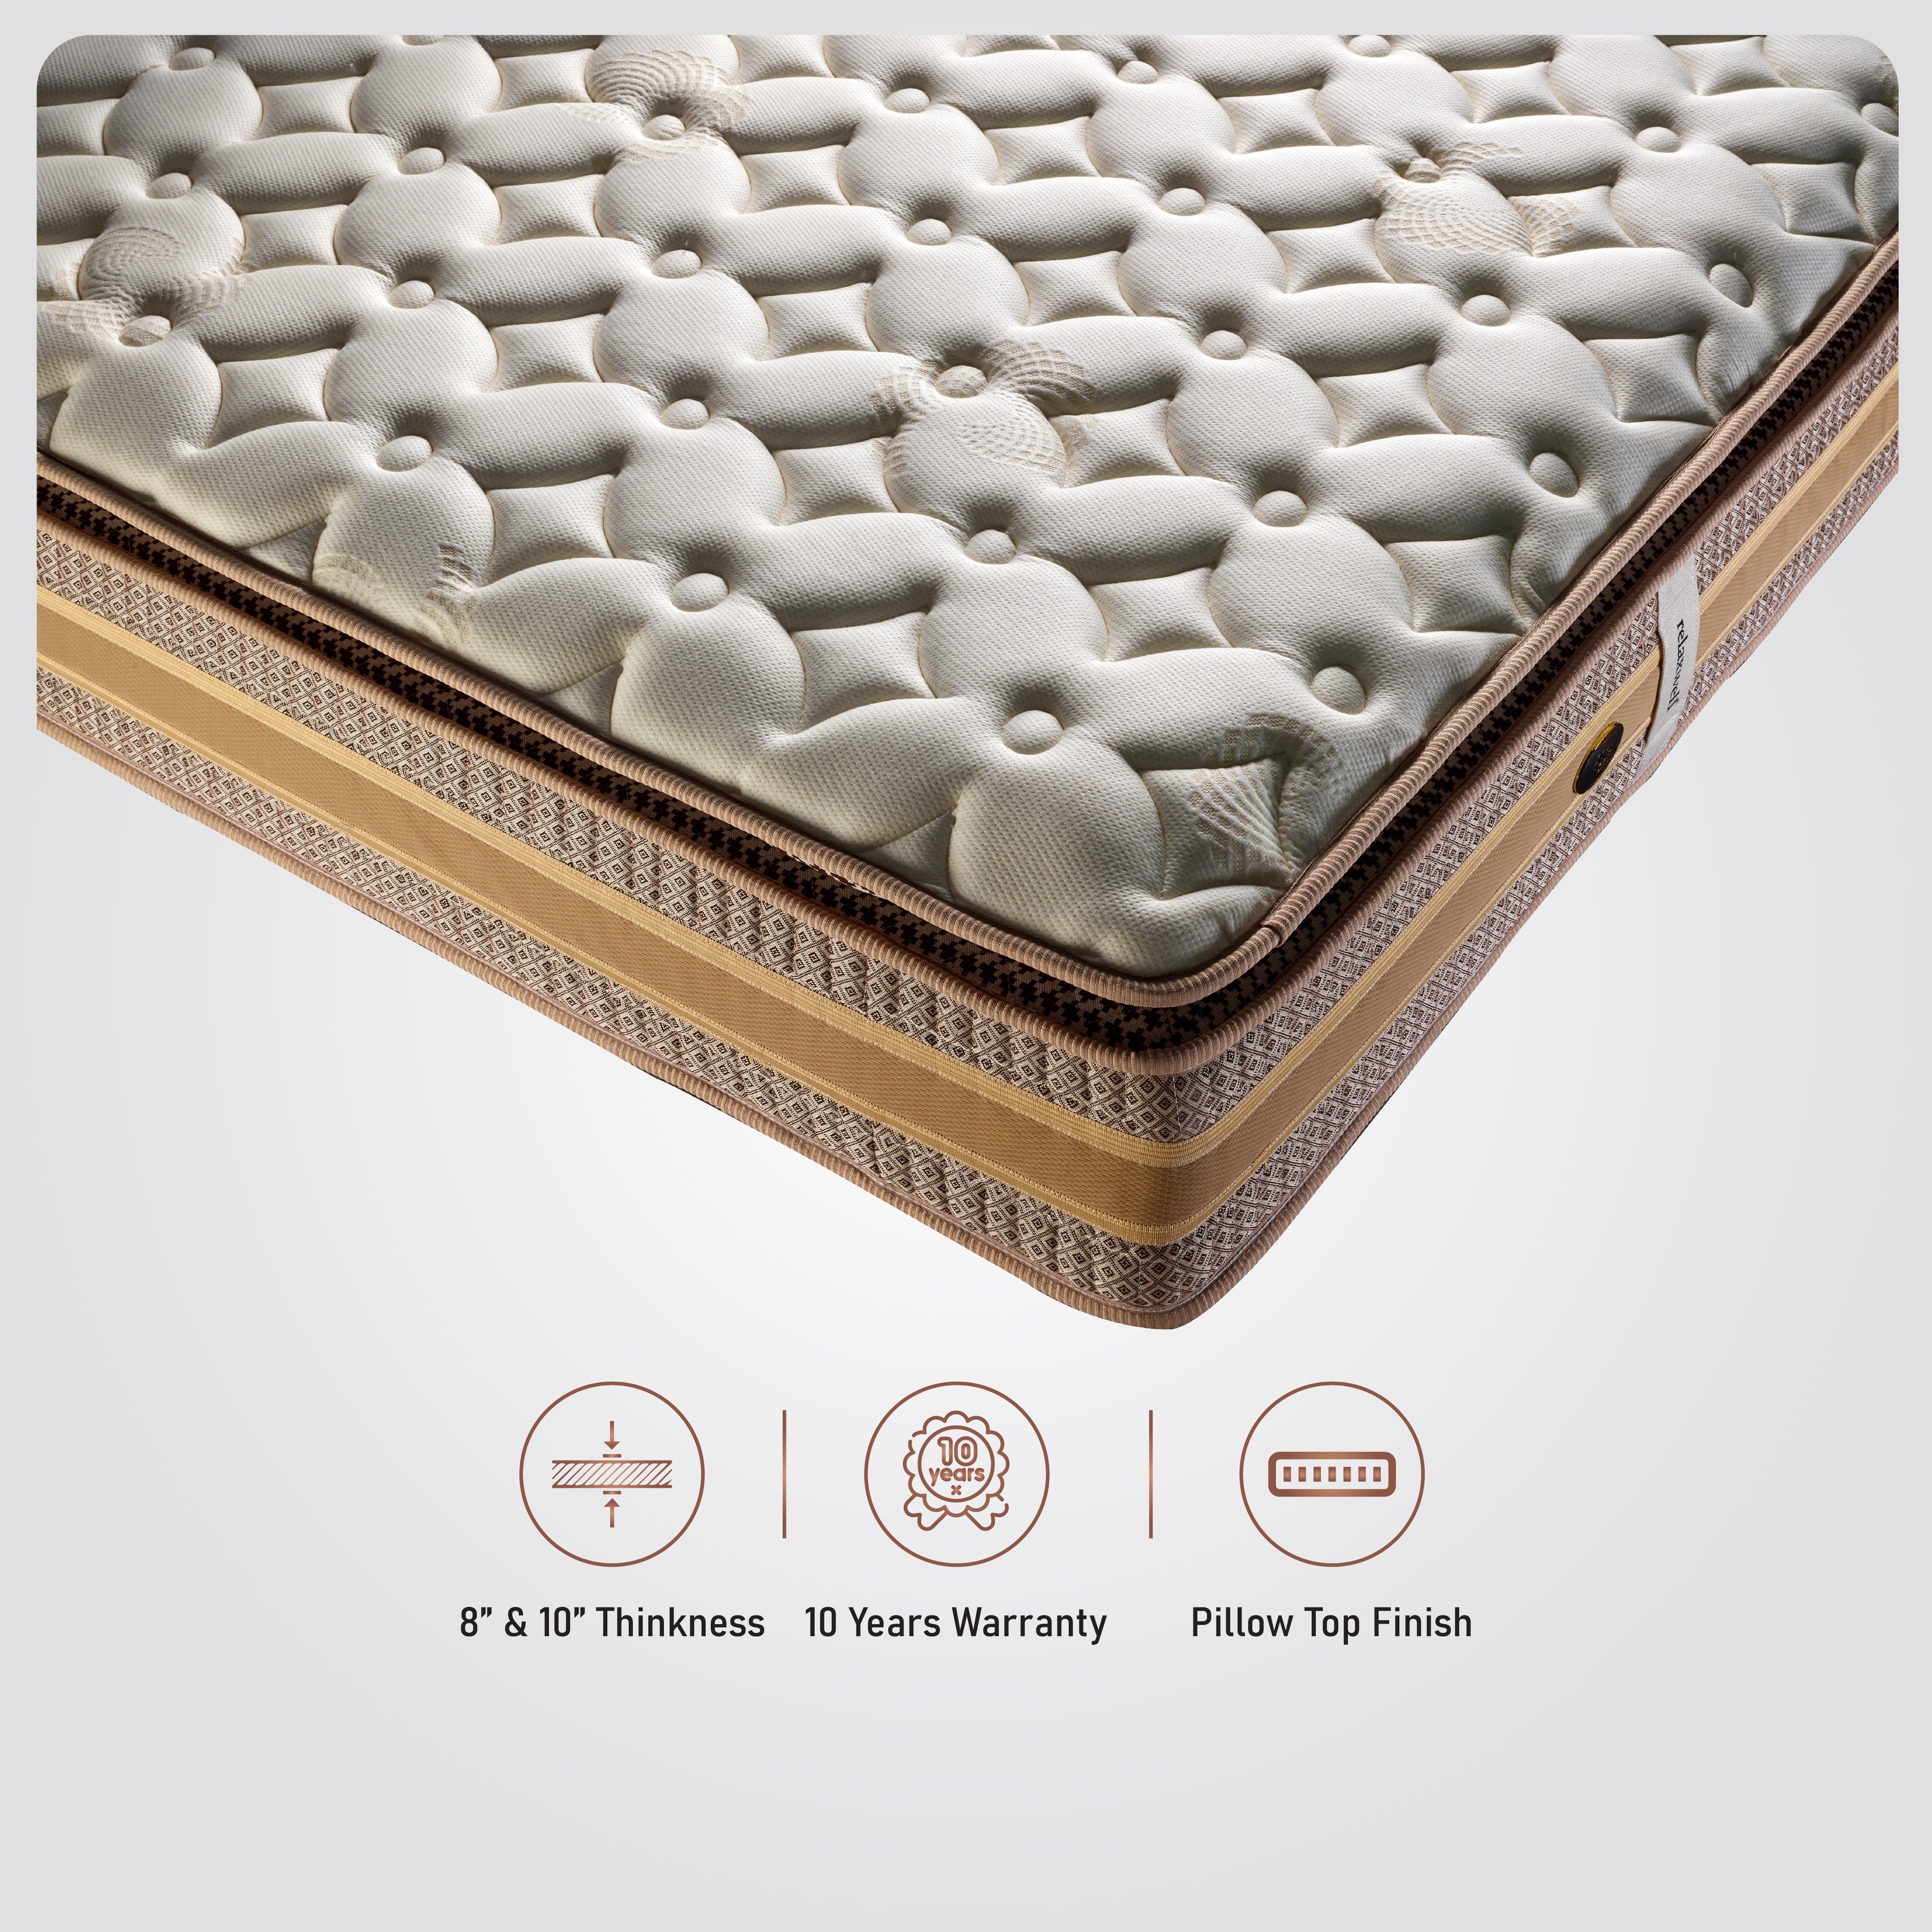 Buy Copper Infused Pocketed Spring Custom Mattress In India